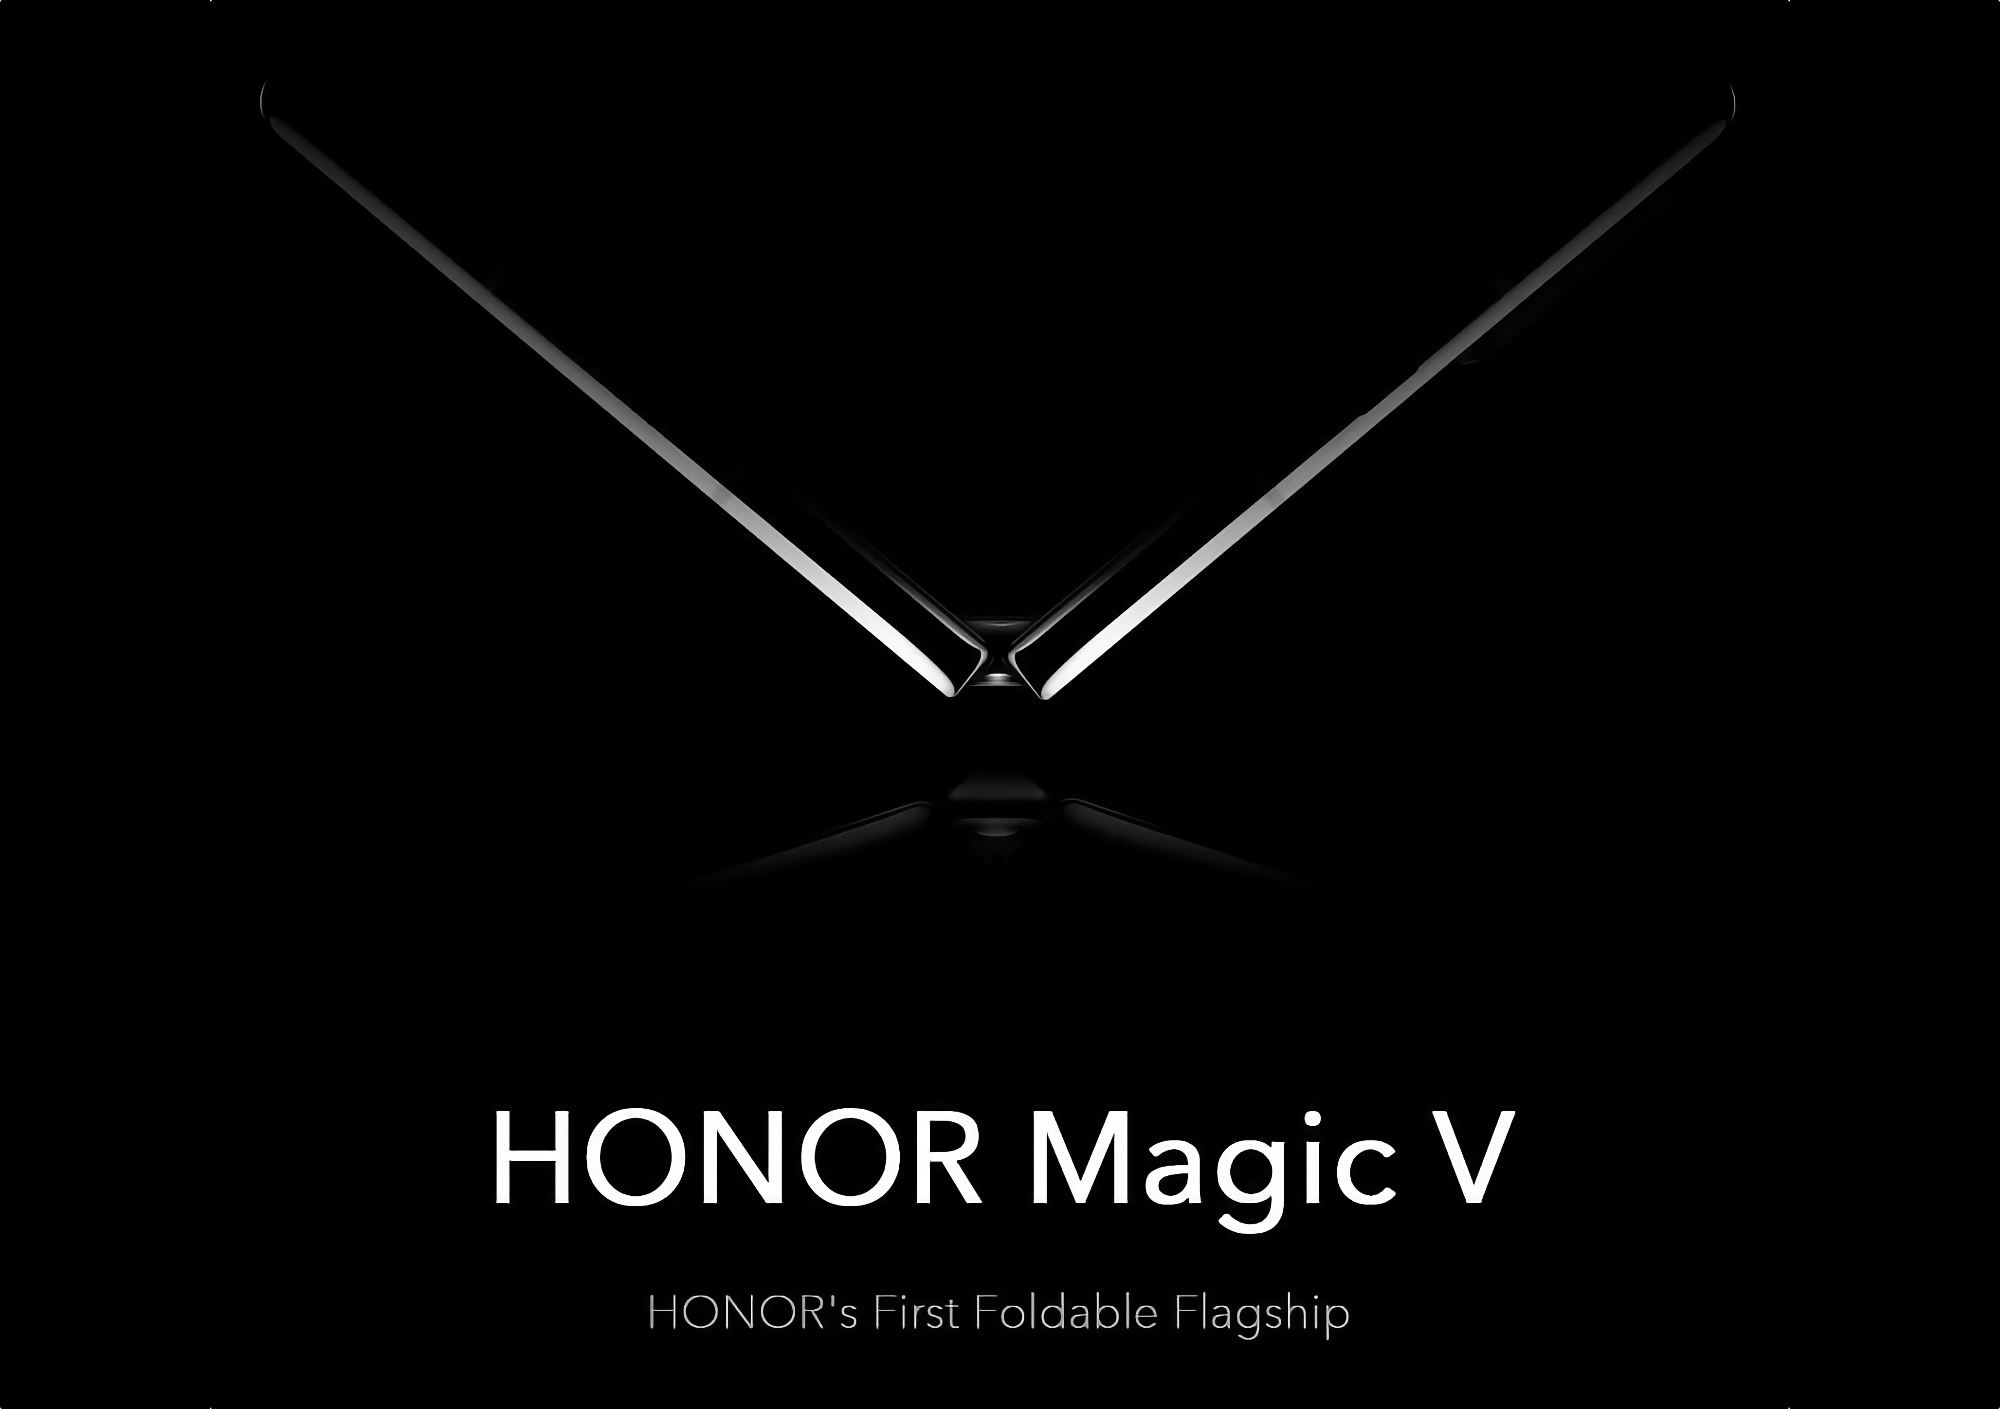 Insider: Honor Magic V foldable smartphone with Snapdragon 8 Gen 1 chip announced on January 10